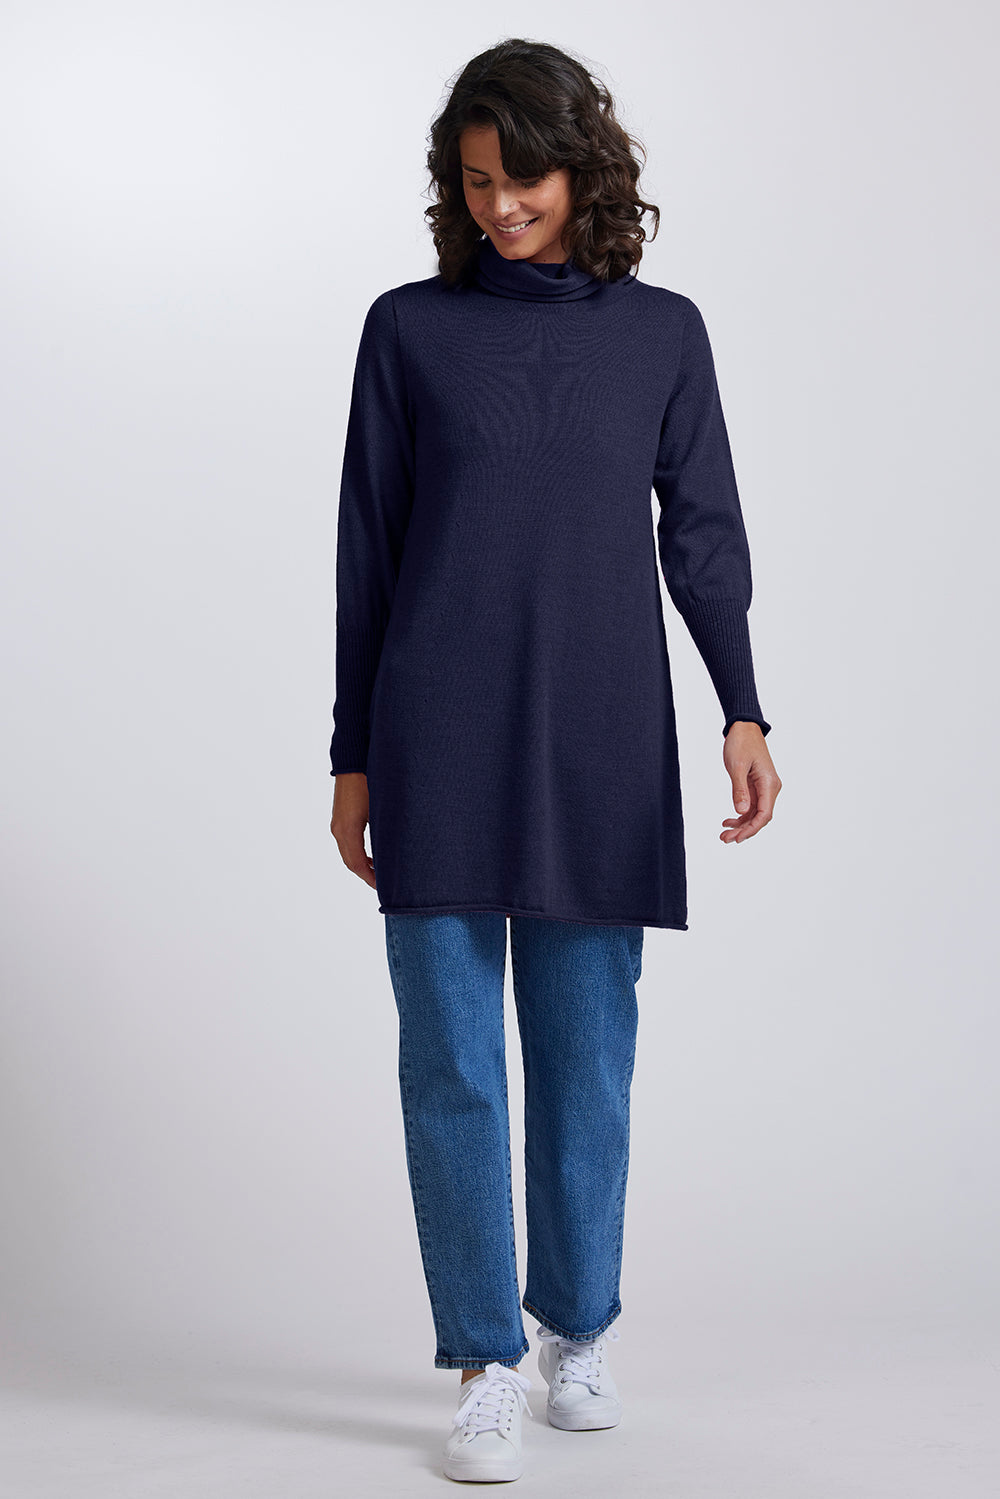 Flared Tunic in Light Navy by Royal Merino